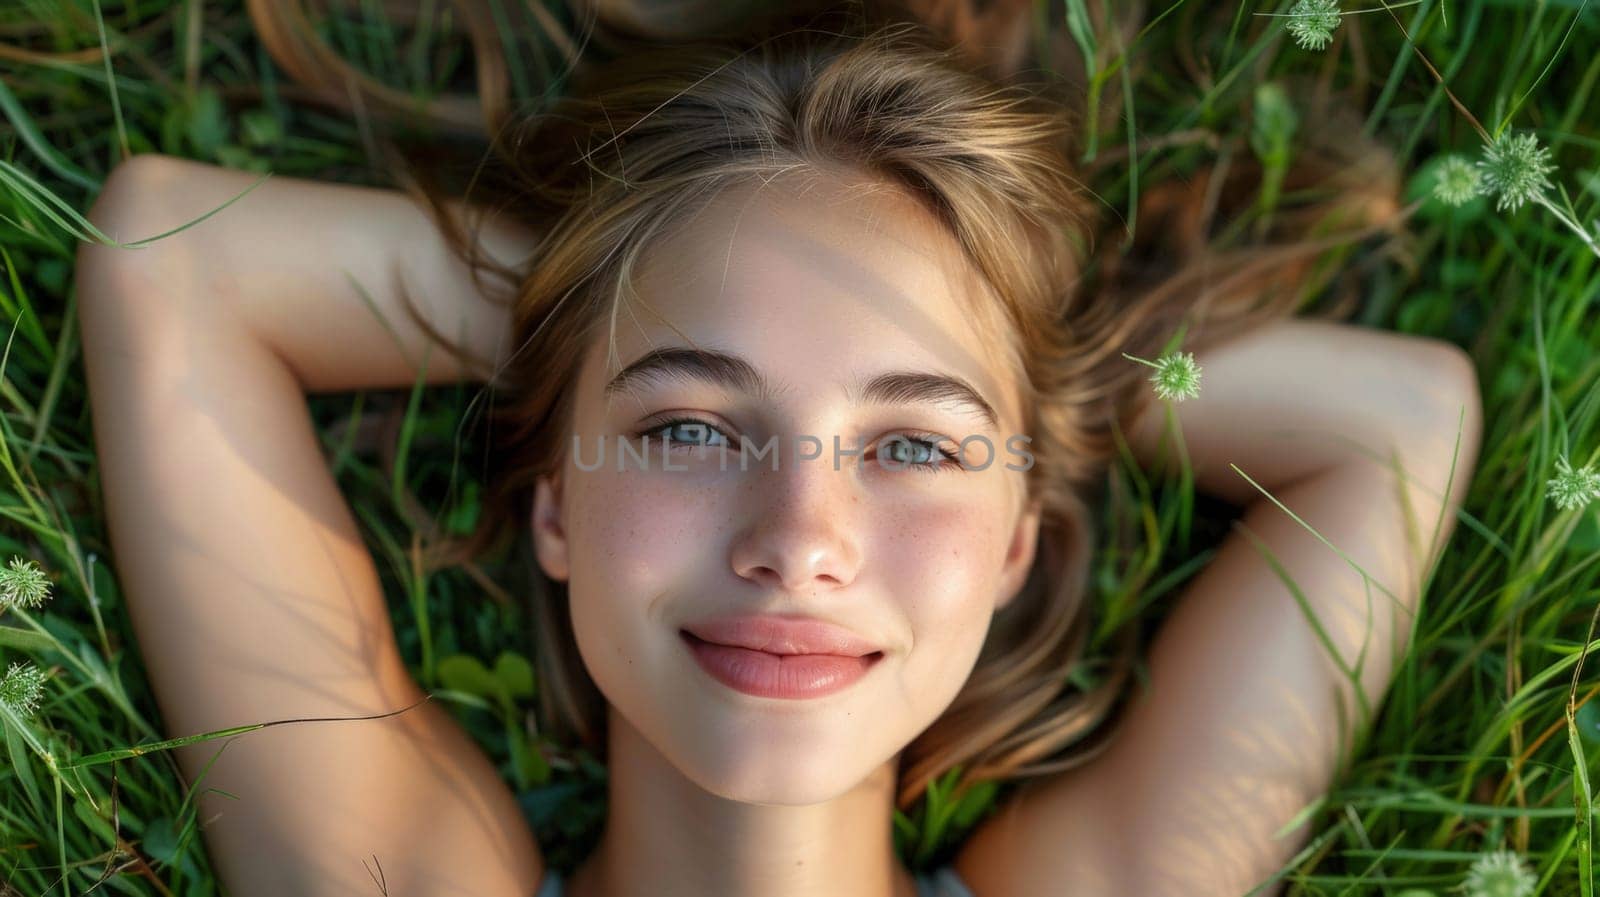 A woman laying in the grass with her eyes closed